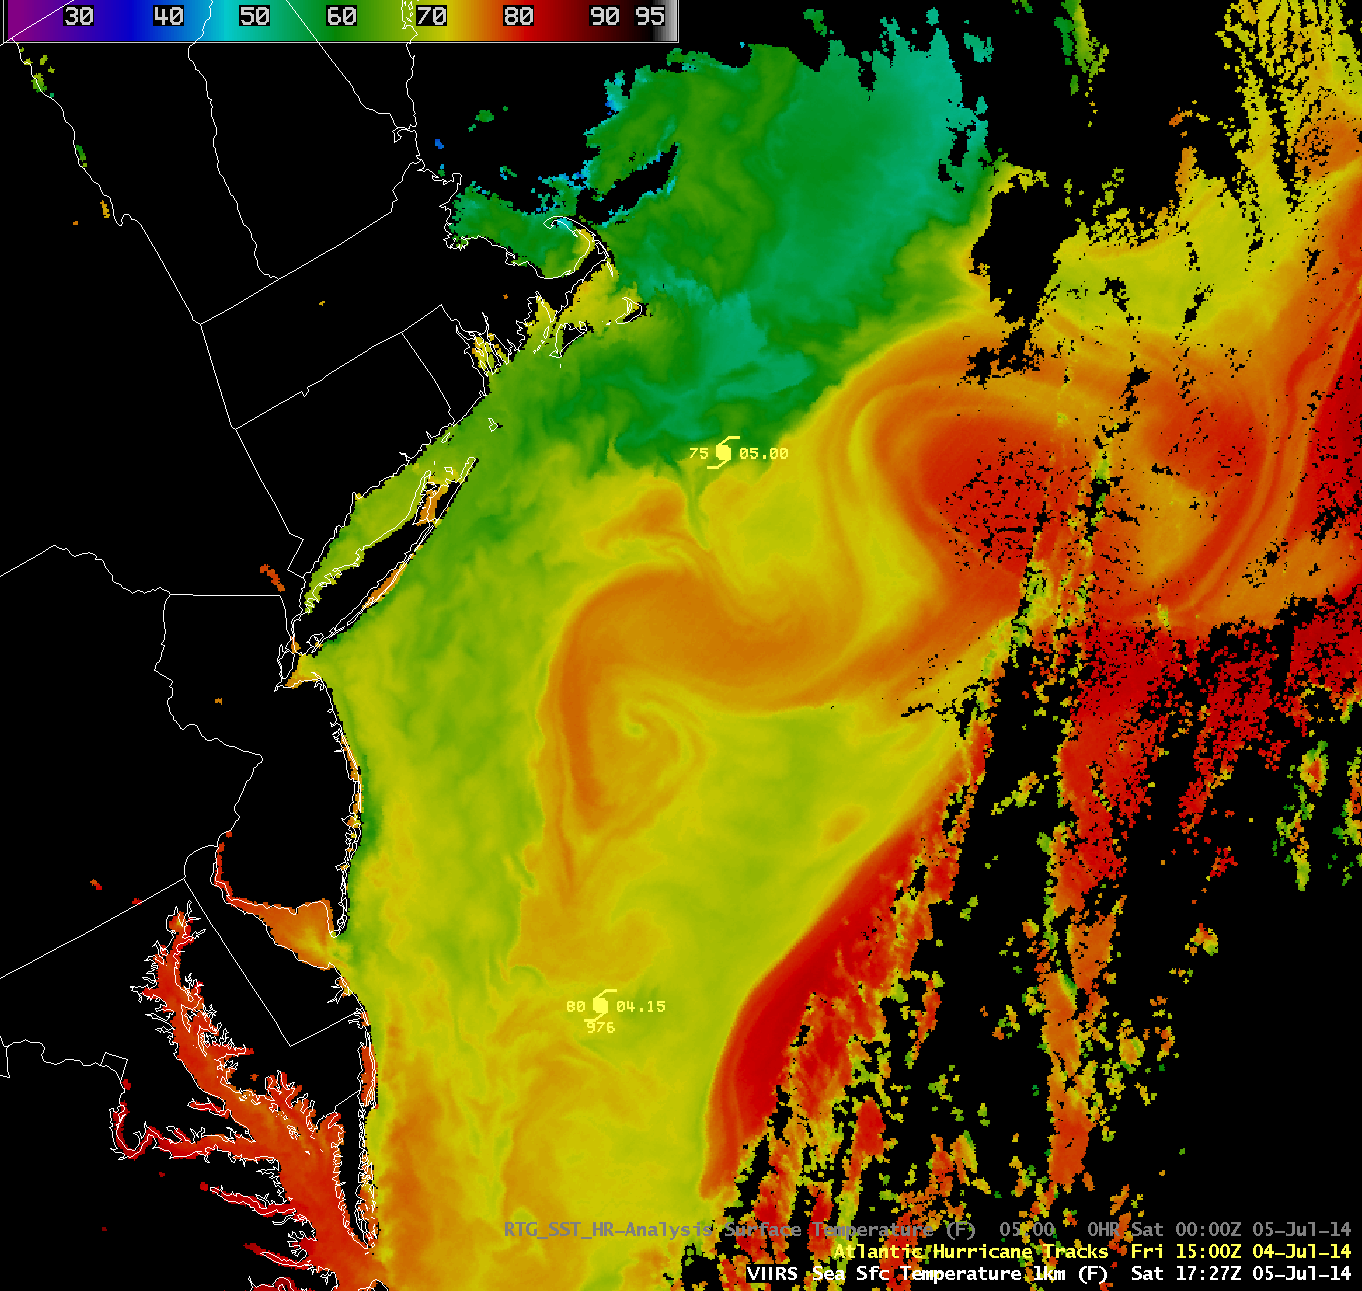 Suomi NPP VIIRS Sea Surface Temperature product, with a comparison to the RTG_SST_HR analysis